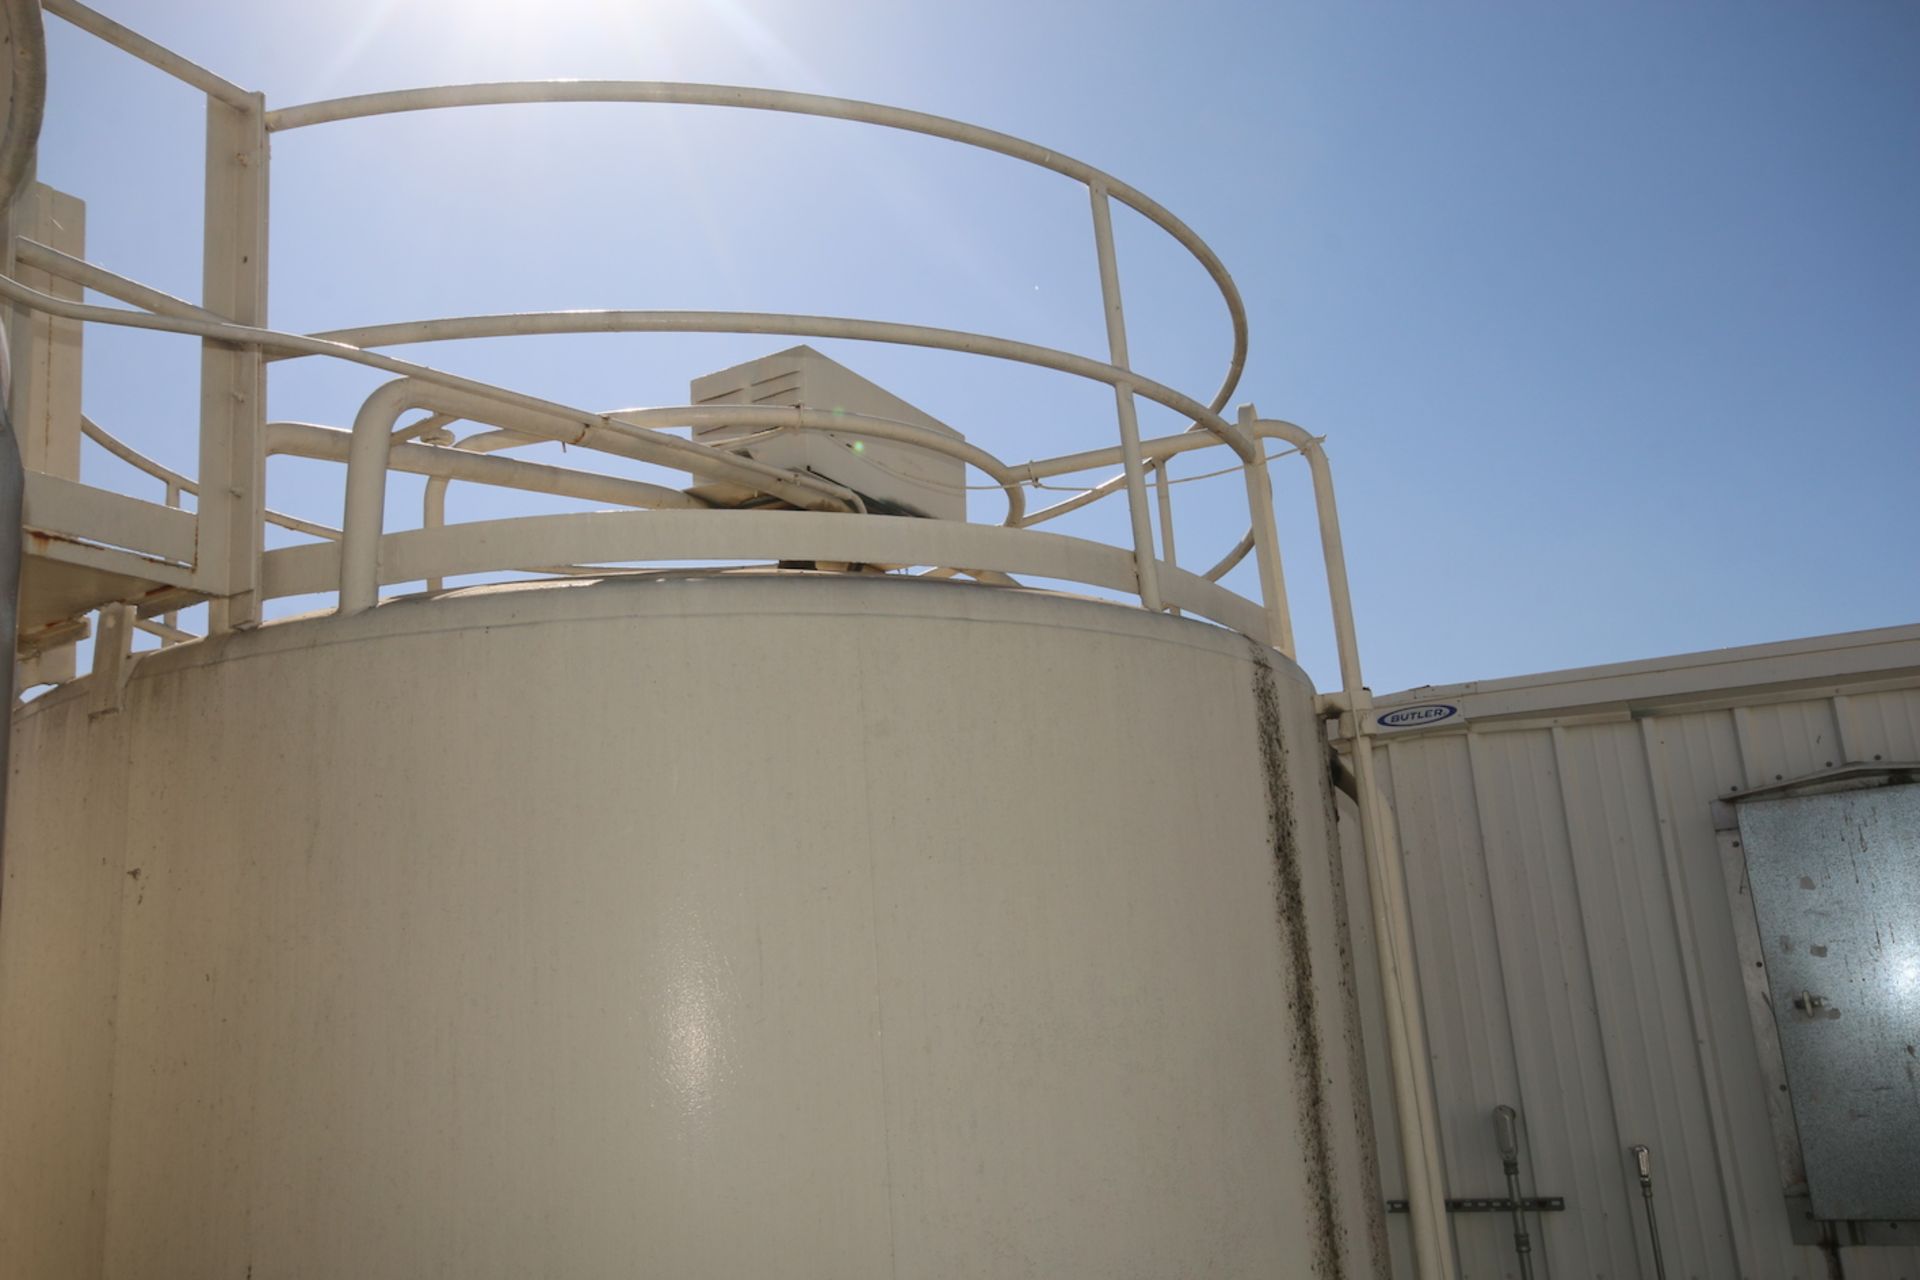 Mueller 15,000 Gal. S/S Refrigerated Silo, Door SN D7802-3, with Sloped Bottom, Spray Balls - Image 3 of 8